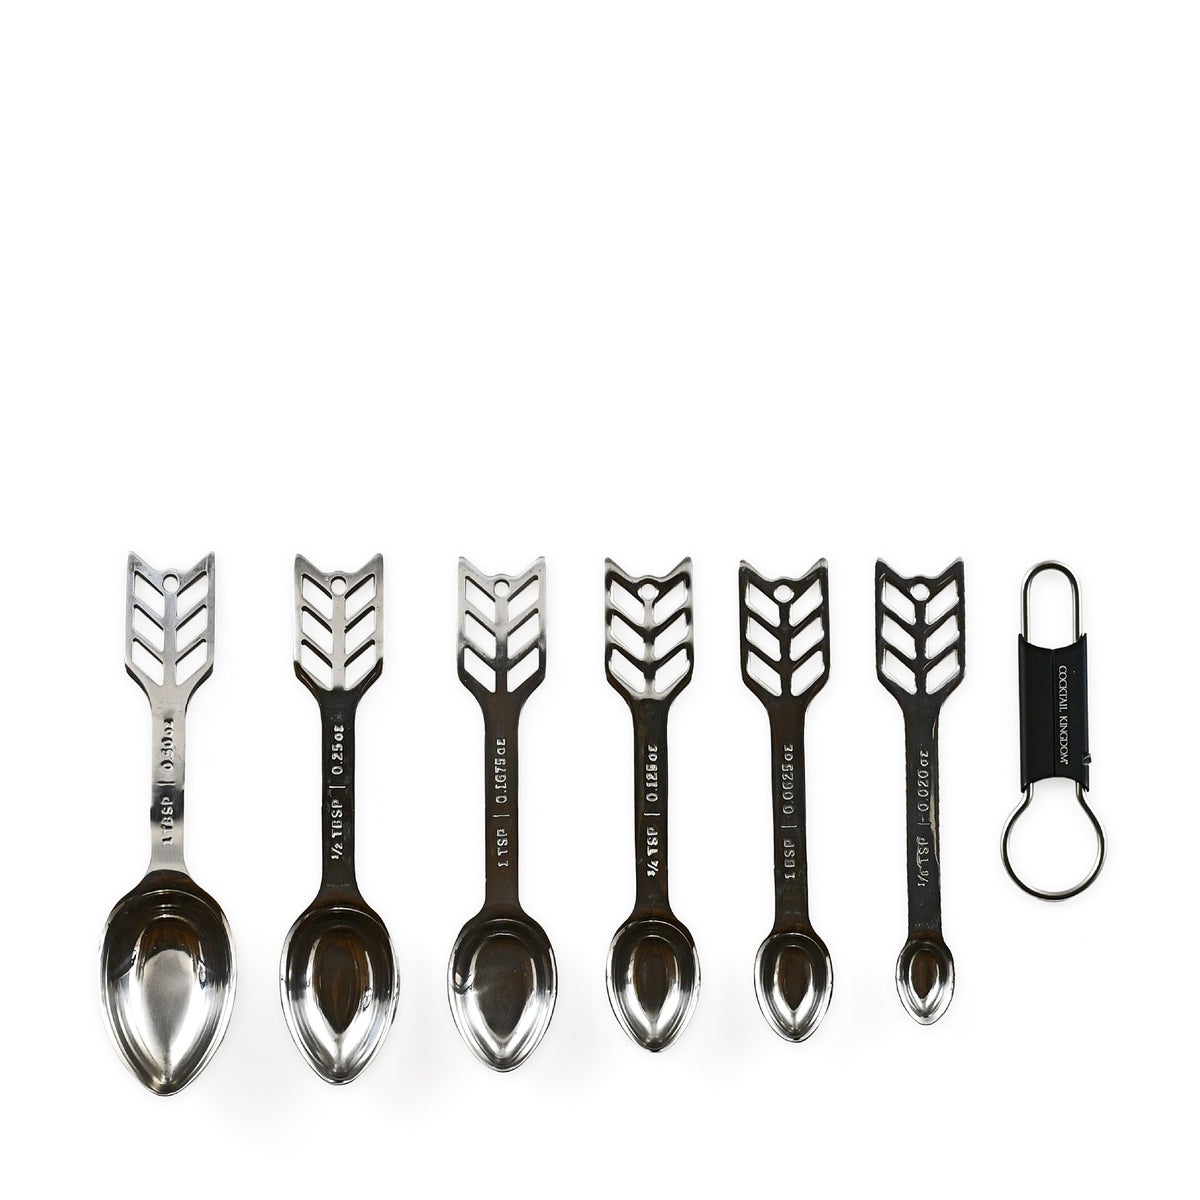 COCKTAIL KINGDOM - MEEHANS MIXOLOGY SPOONS